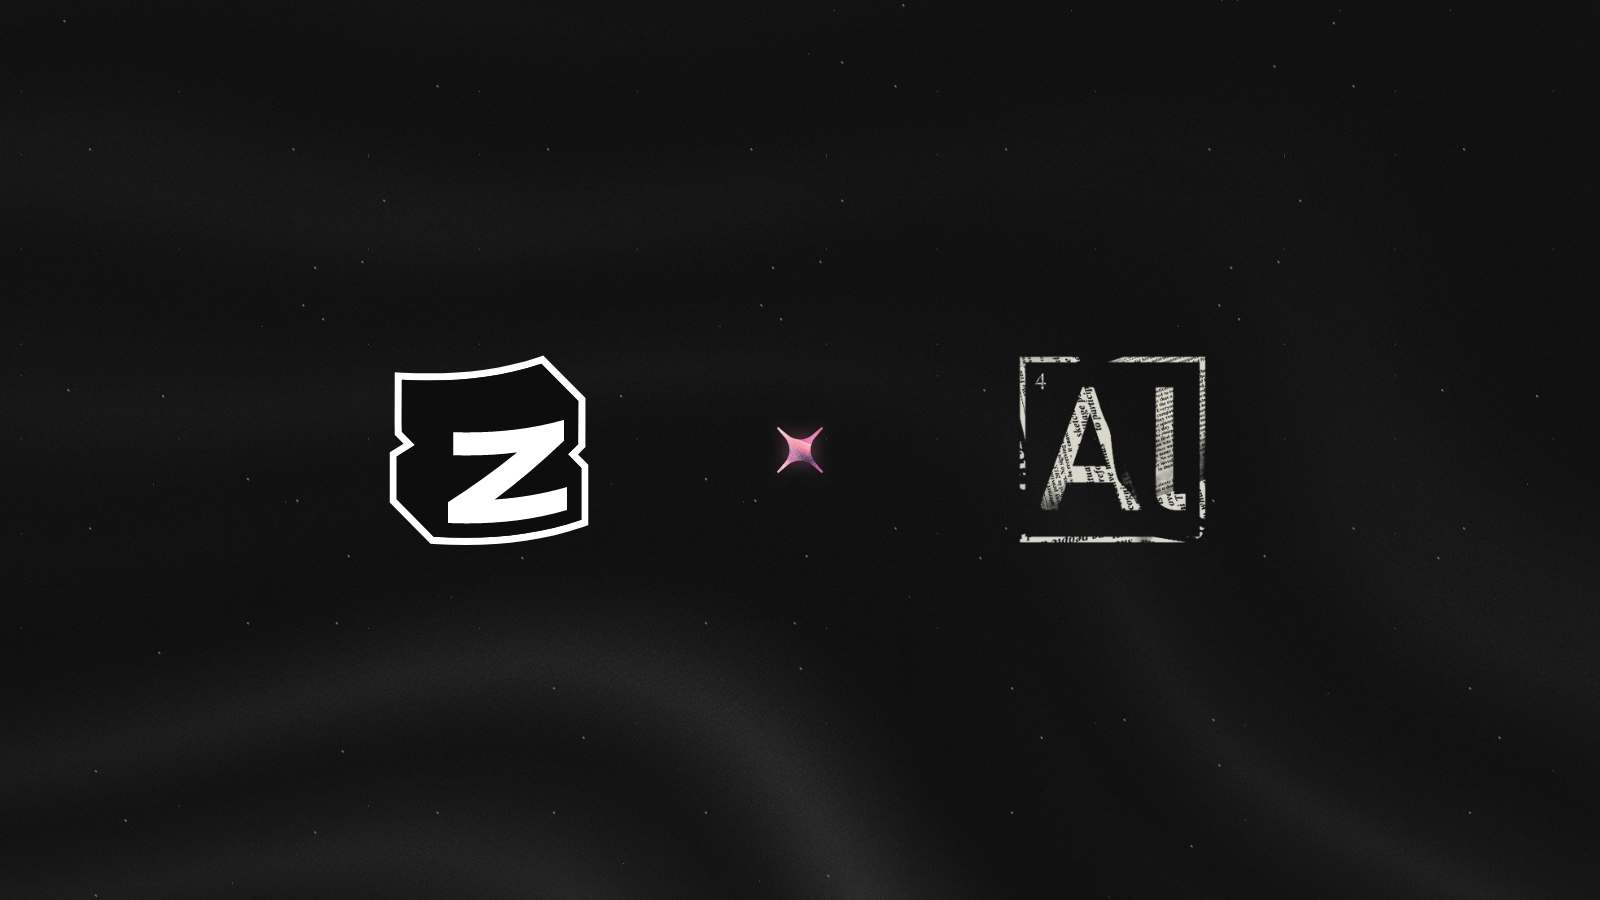 Zealy logo and Alter logo